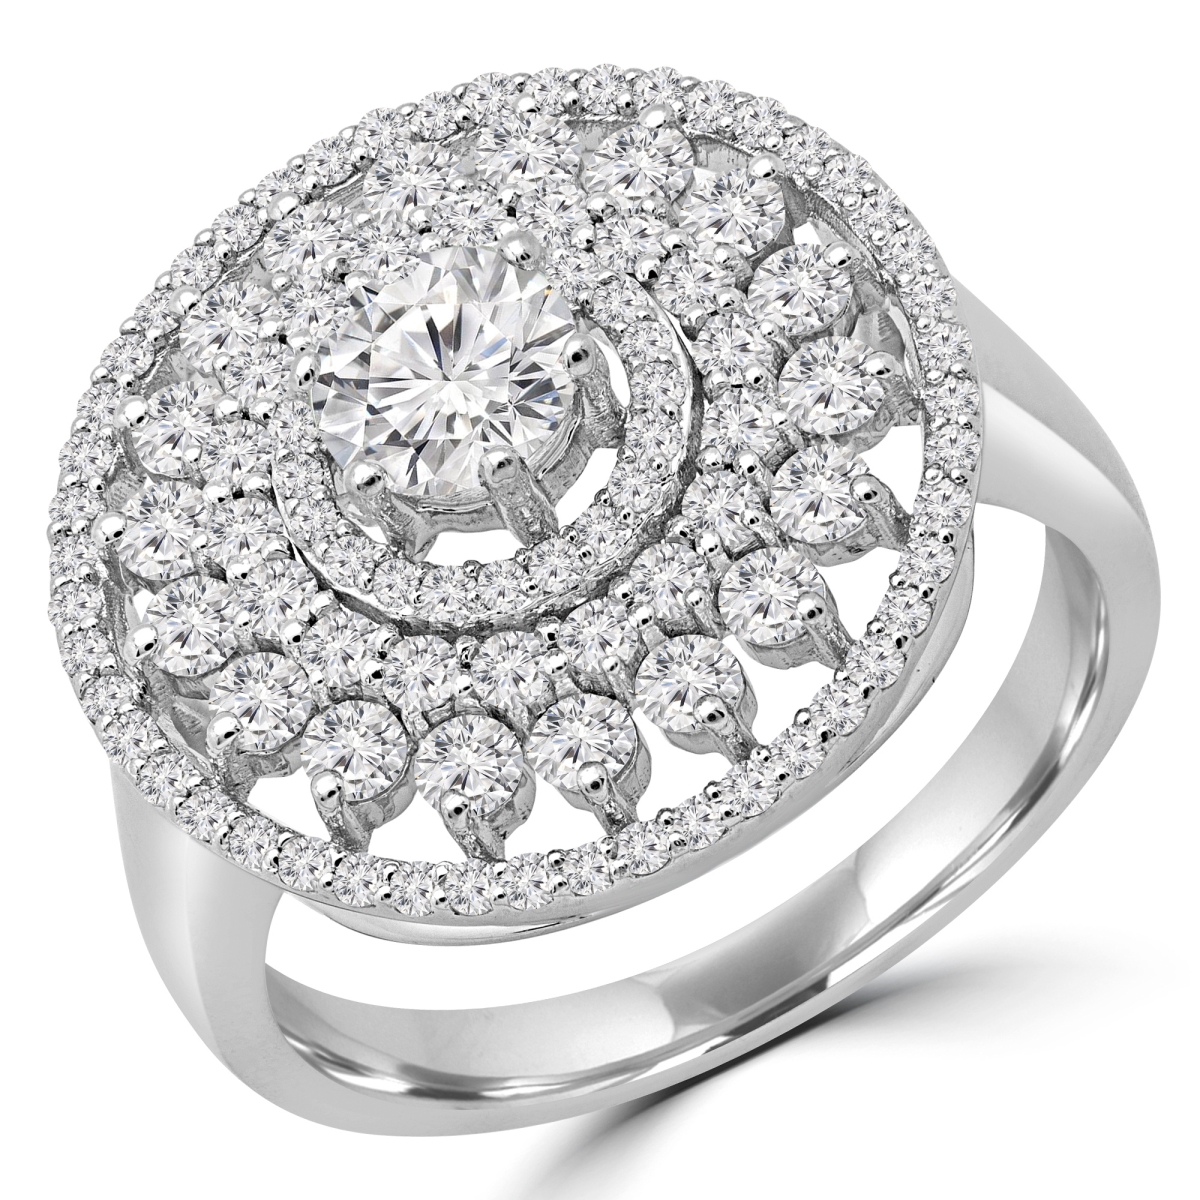 Picture of Majesty Diamonds MD190104-P 1.3 CTW Round Diamond Quadruple Halo Engagement Ring in 14K White Gold